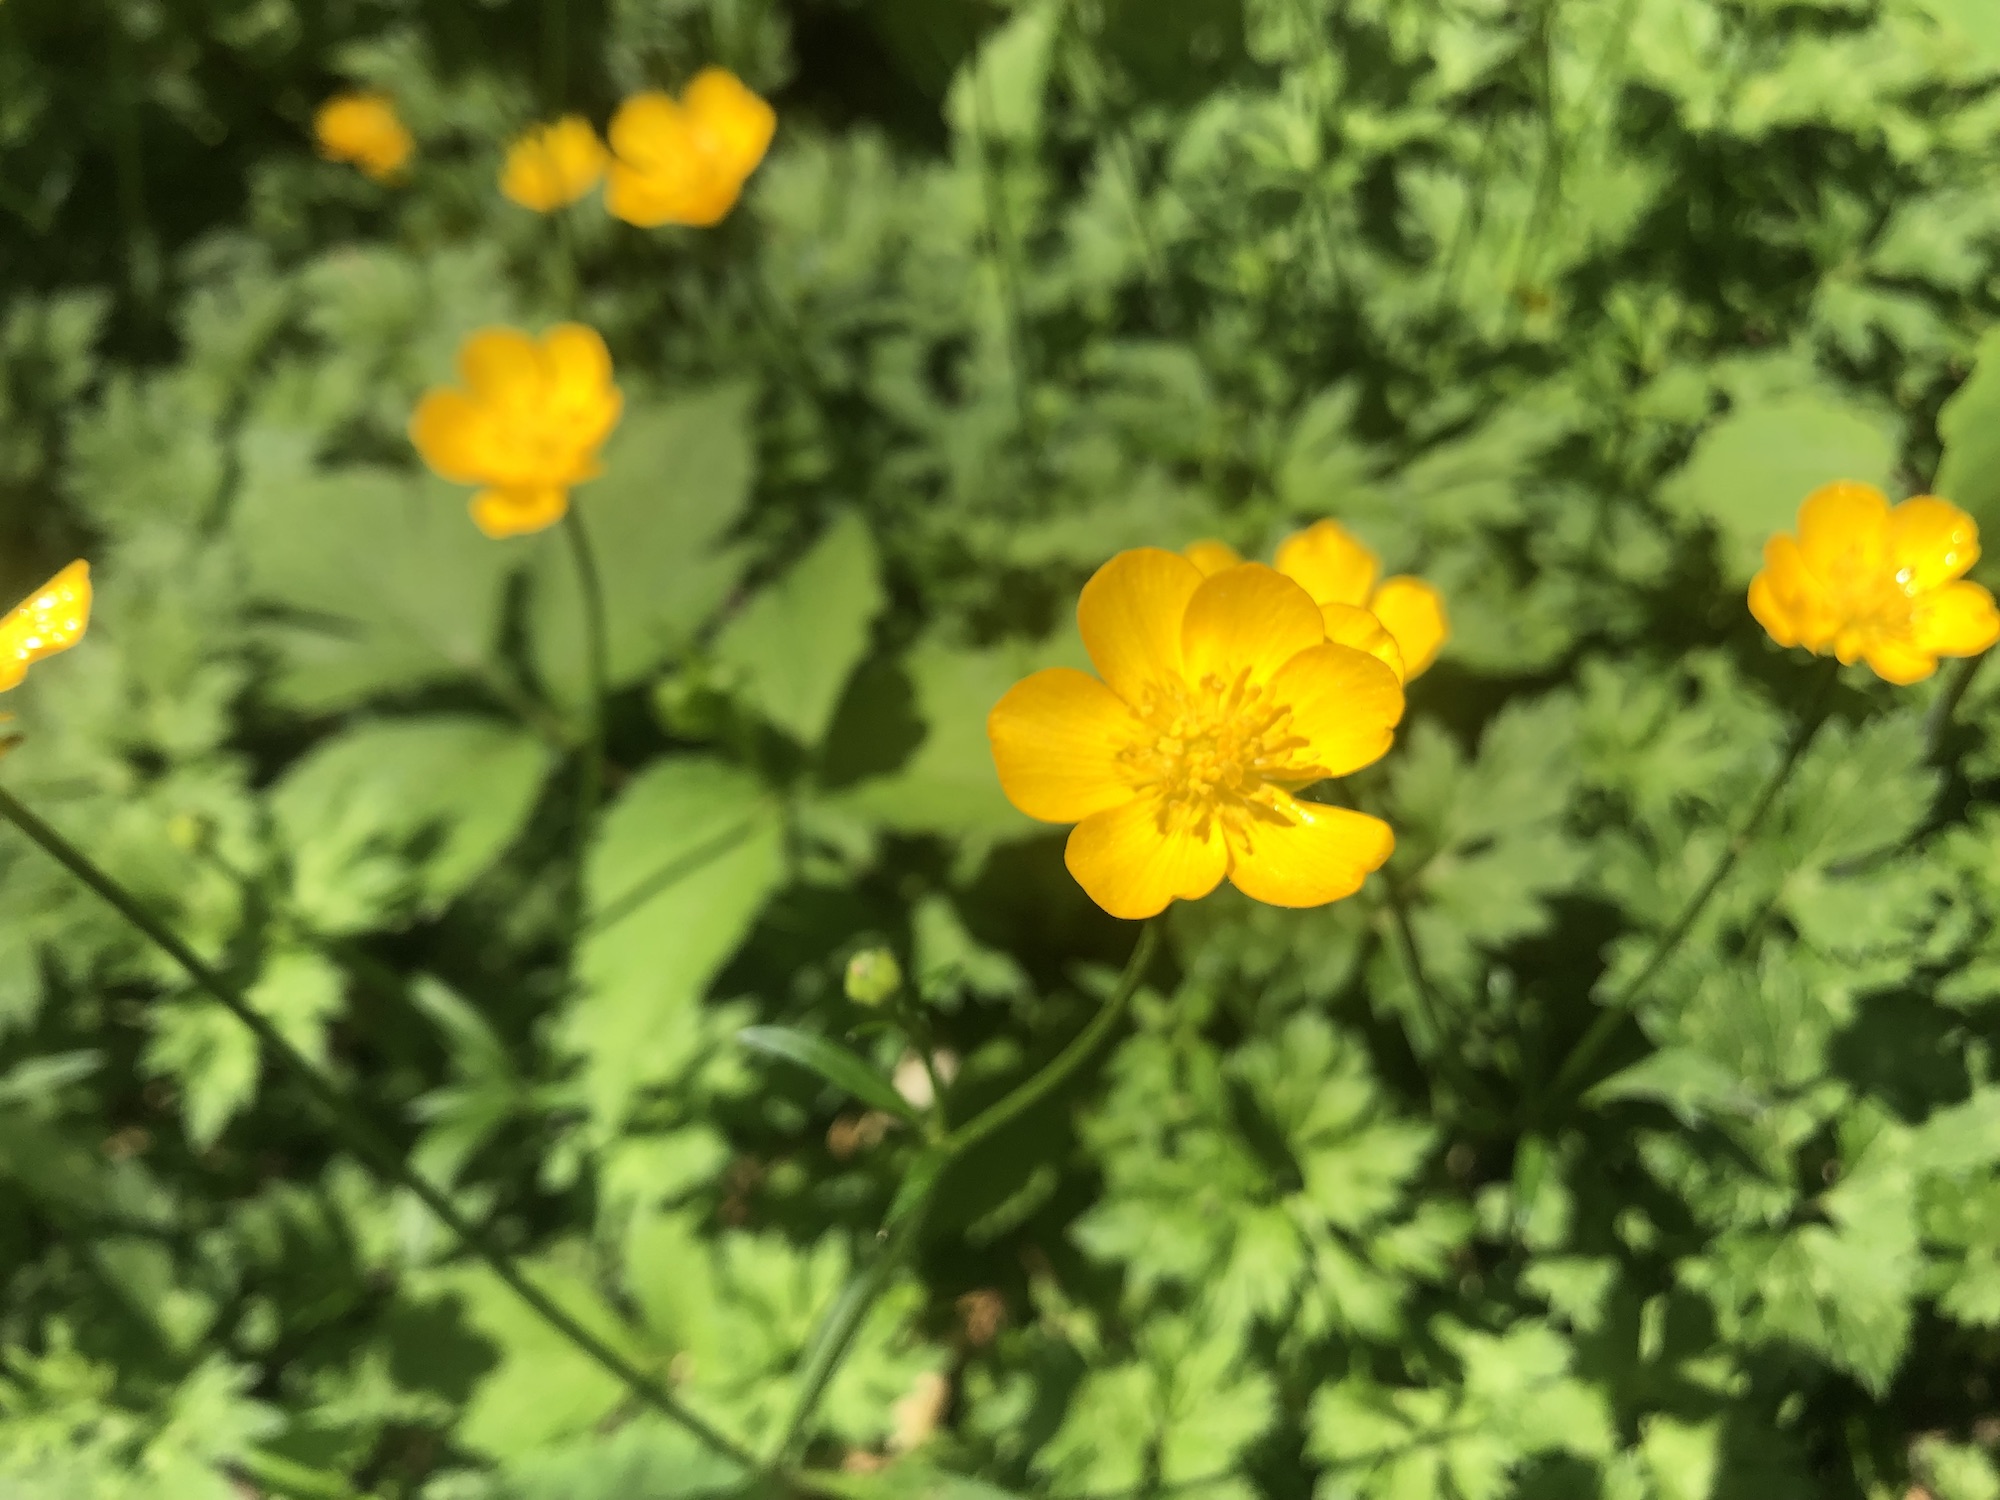 Creeping Buttercup in a grassy clearing along the bike path between Odana Road and Midvale Boulevard in Madison, Wisconsin on June 2, 2022.